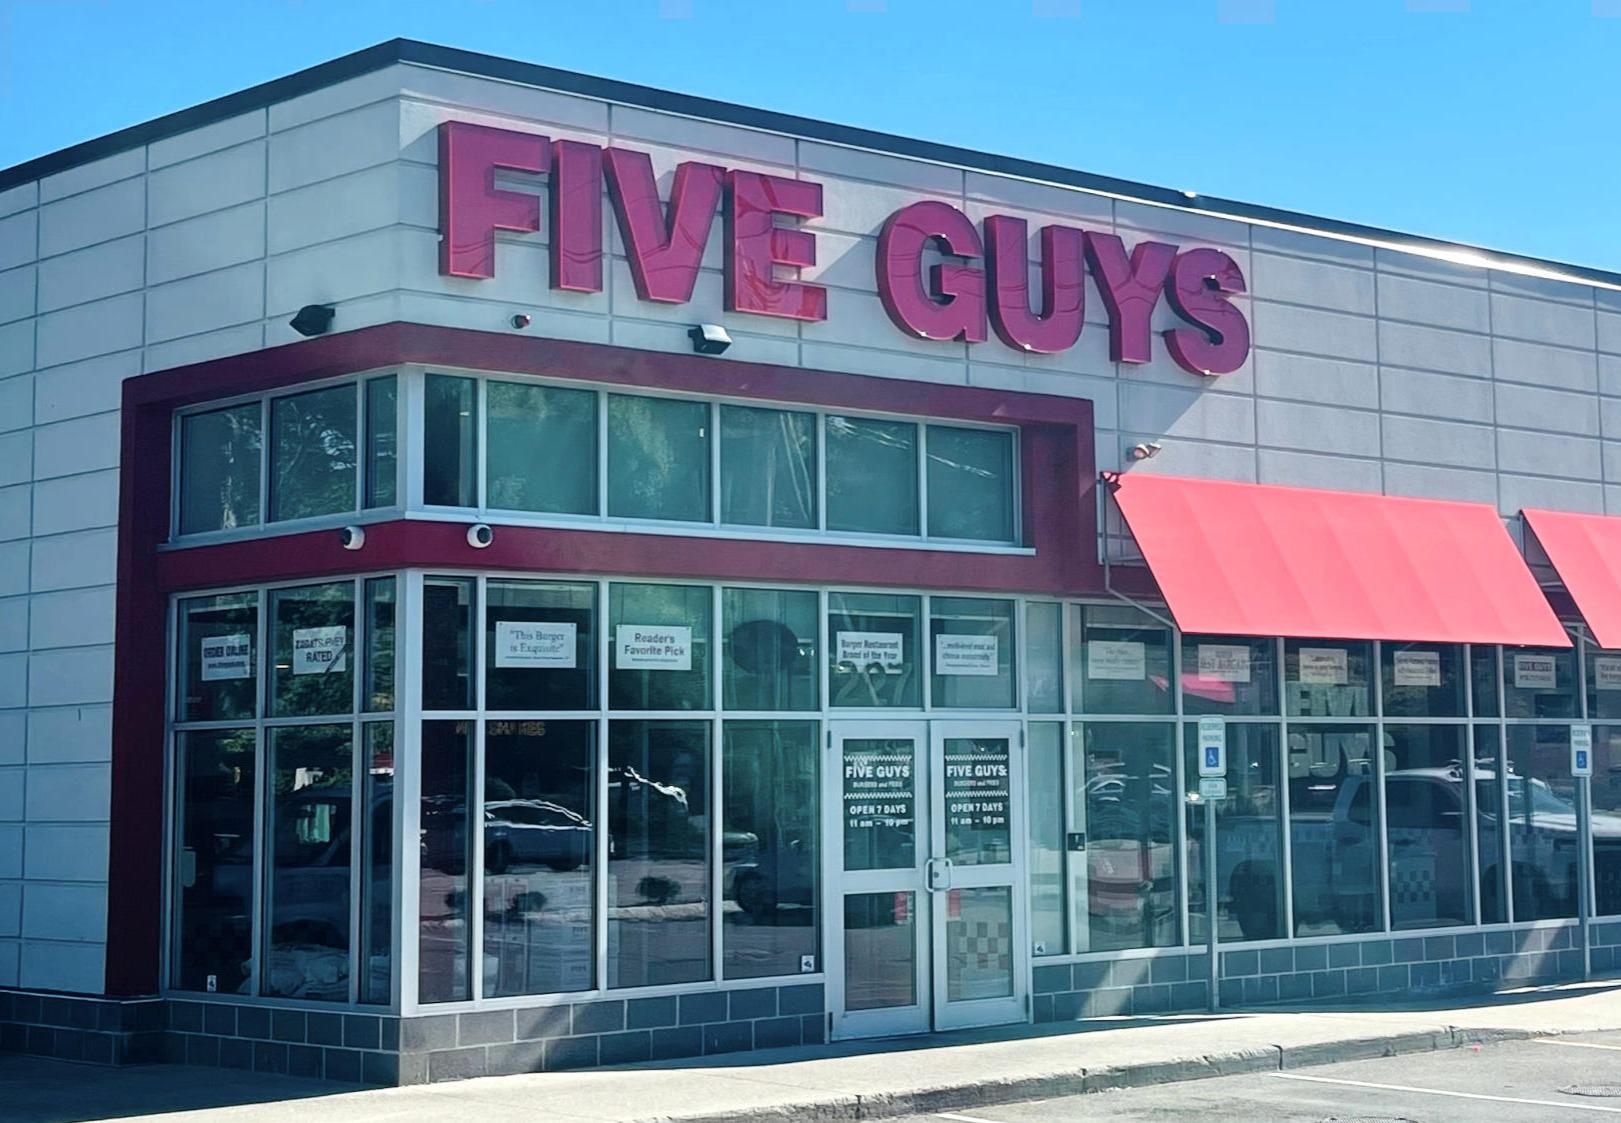 Entrance to the Five Guys restaurant at 227 Andover Street in Peabody, Mass.